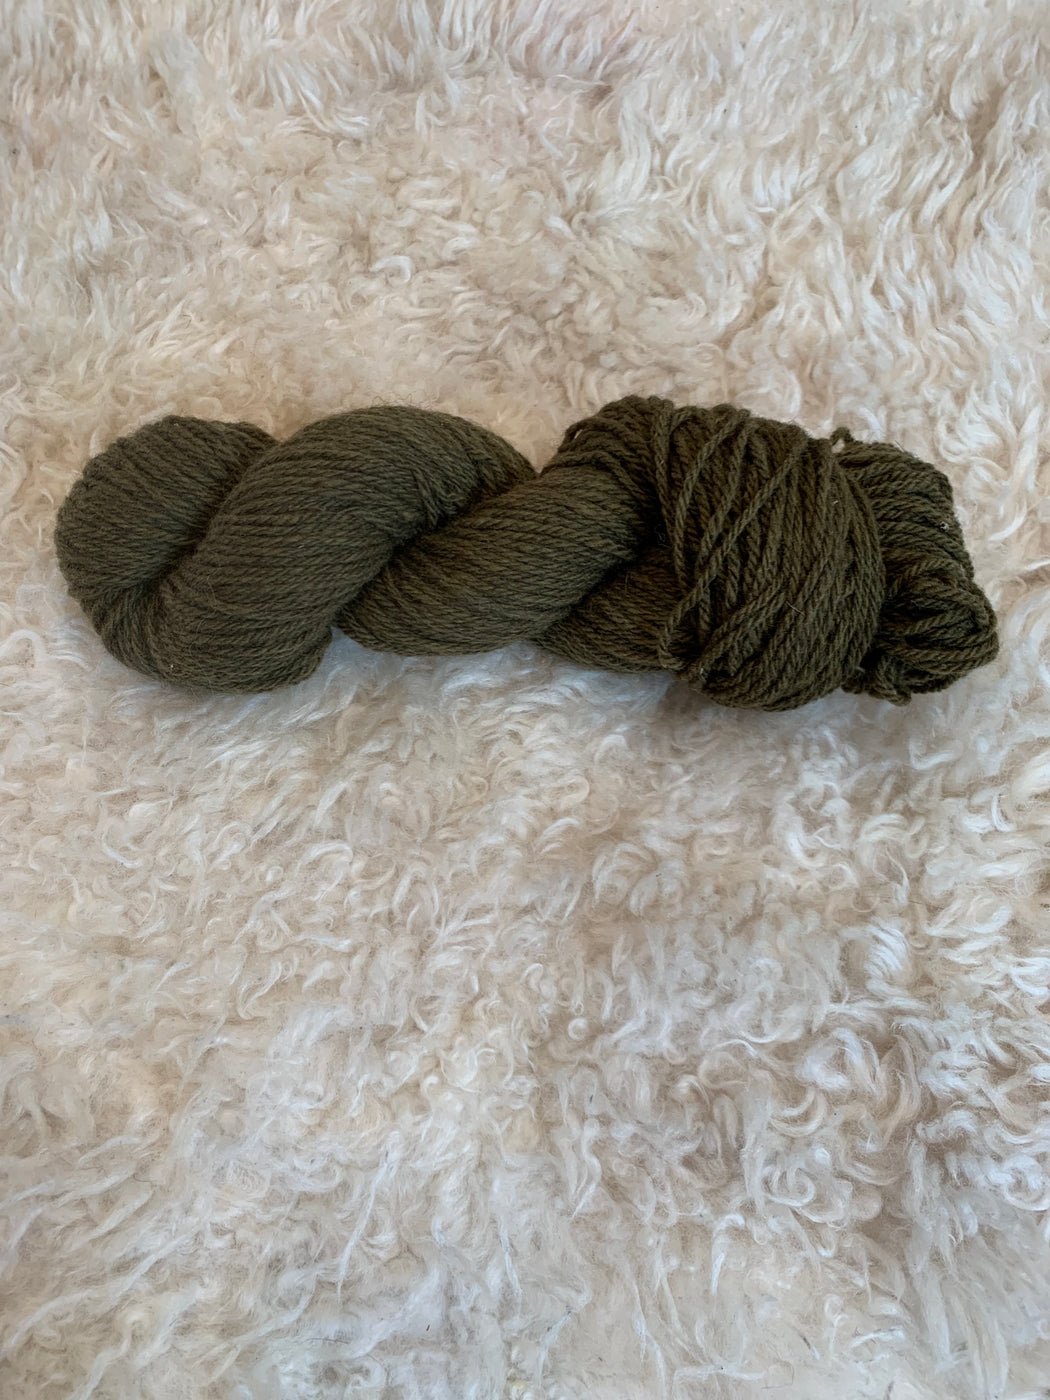 3 Ply Worsted Weight